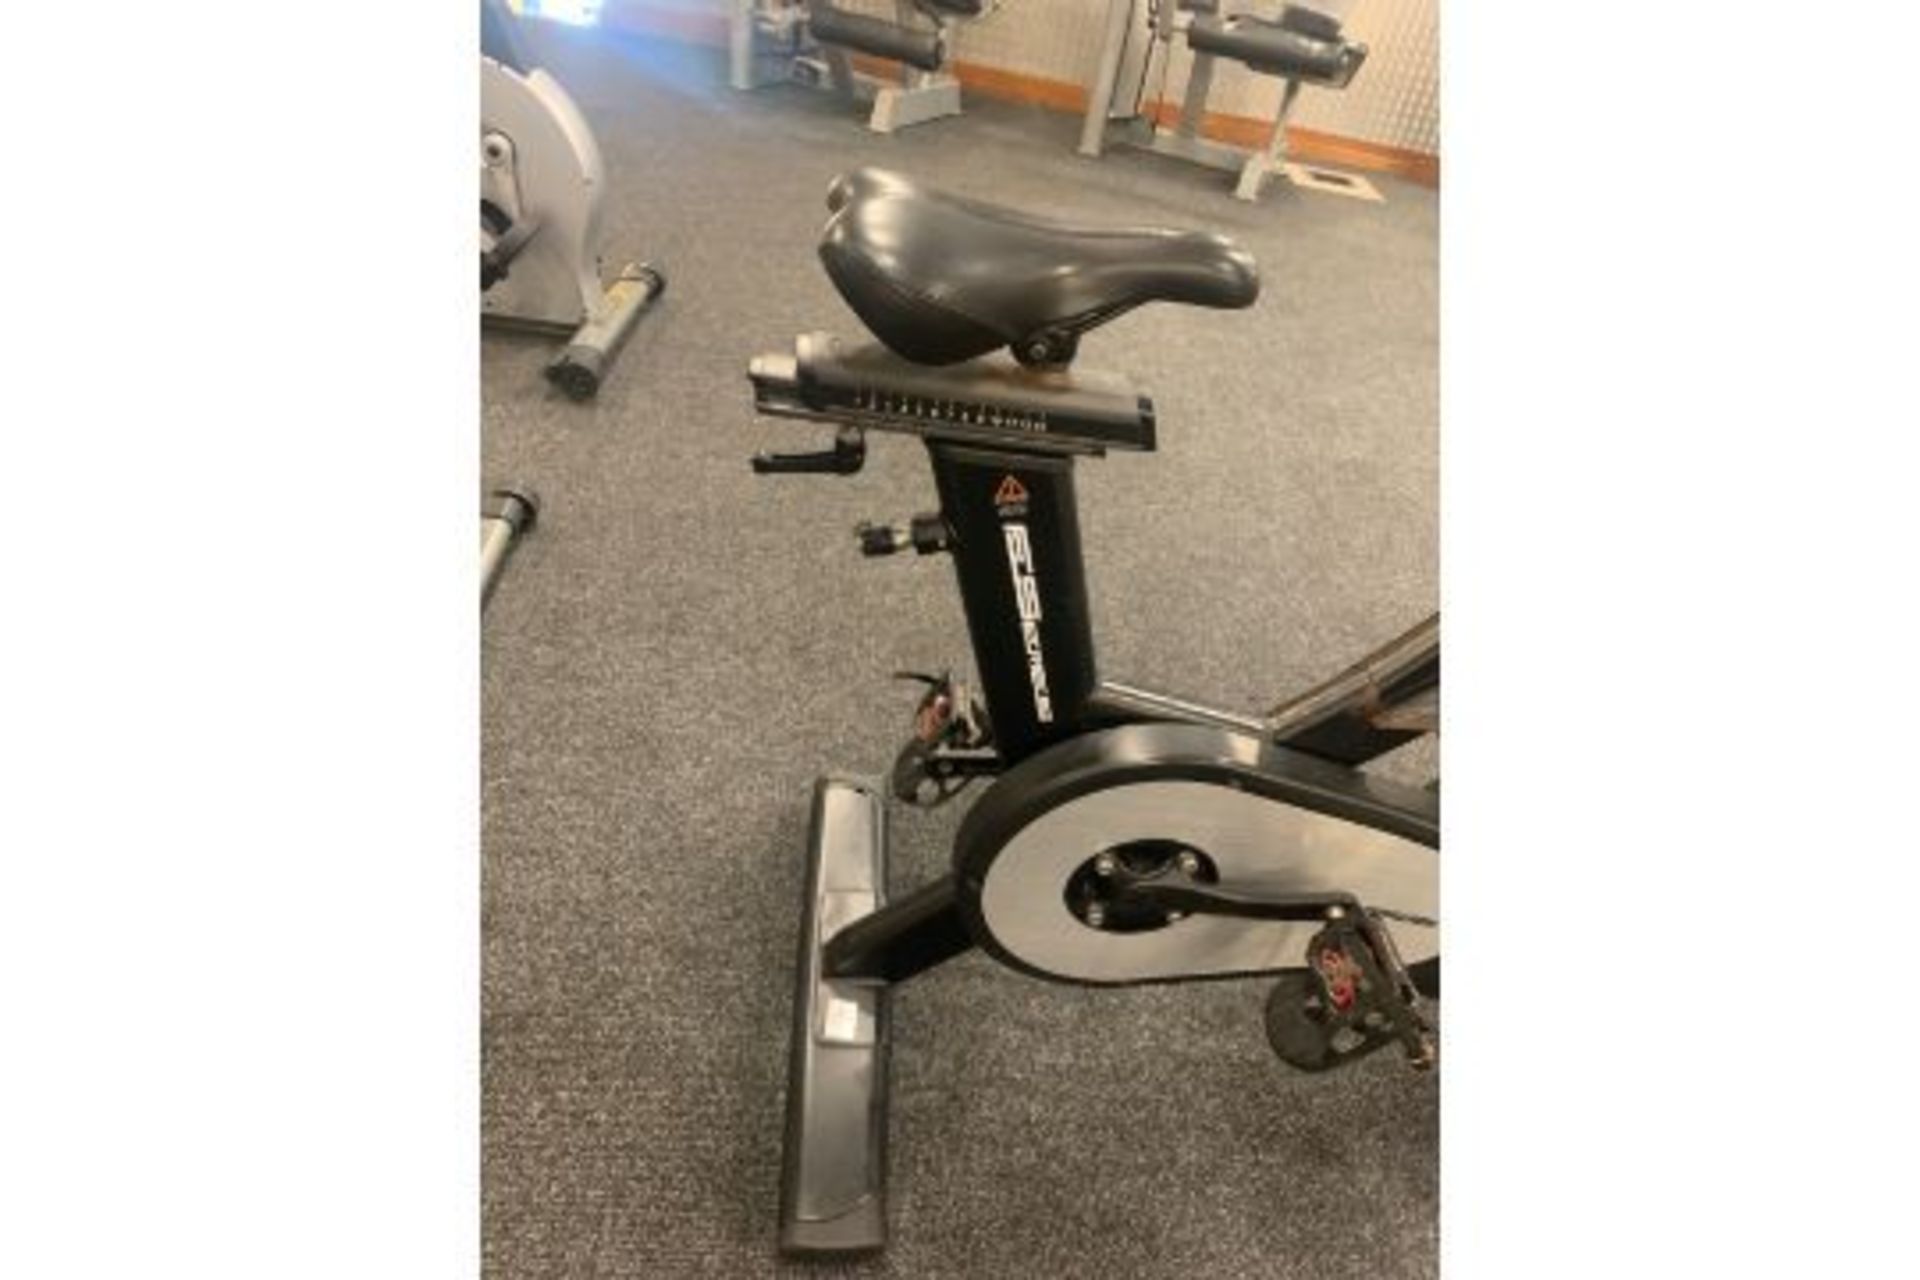 F Series Spin Bike - Image 4 of 5